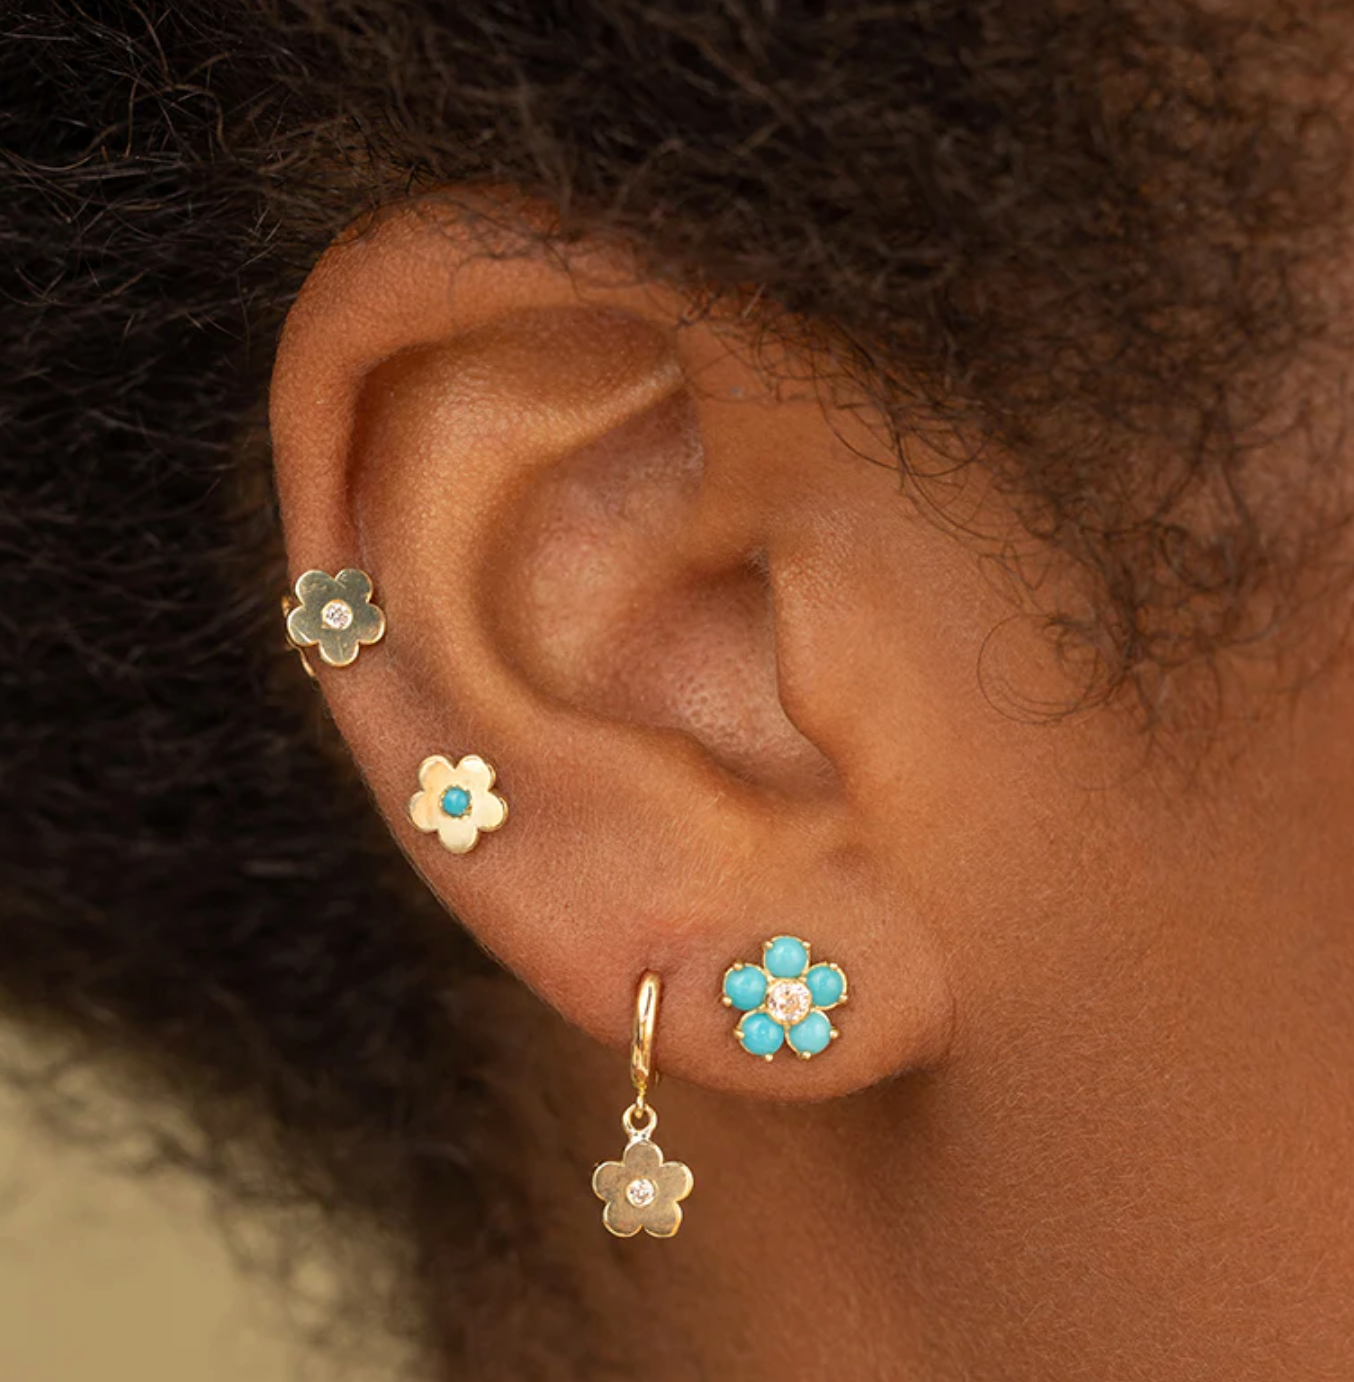 Mini Daisy with Turquoise Center Studs